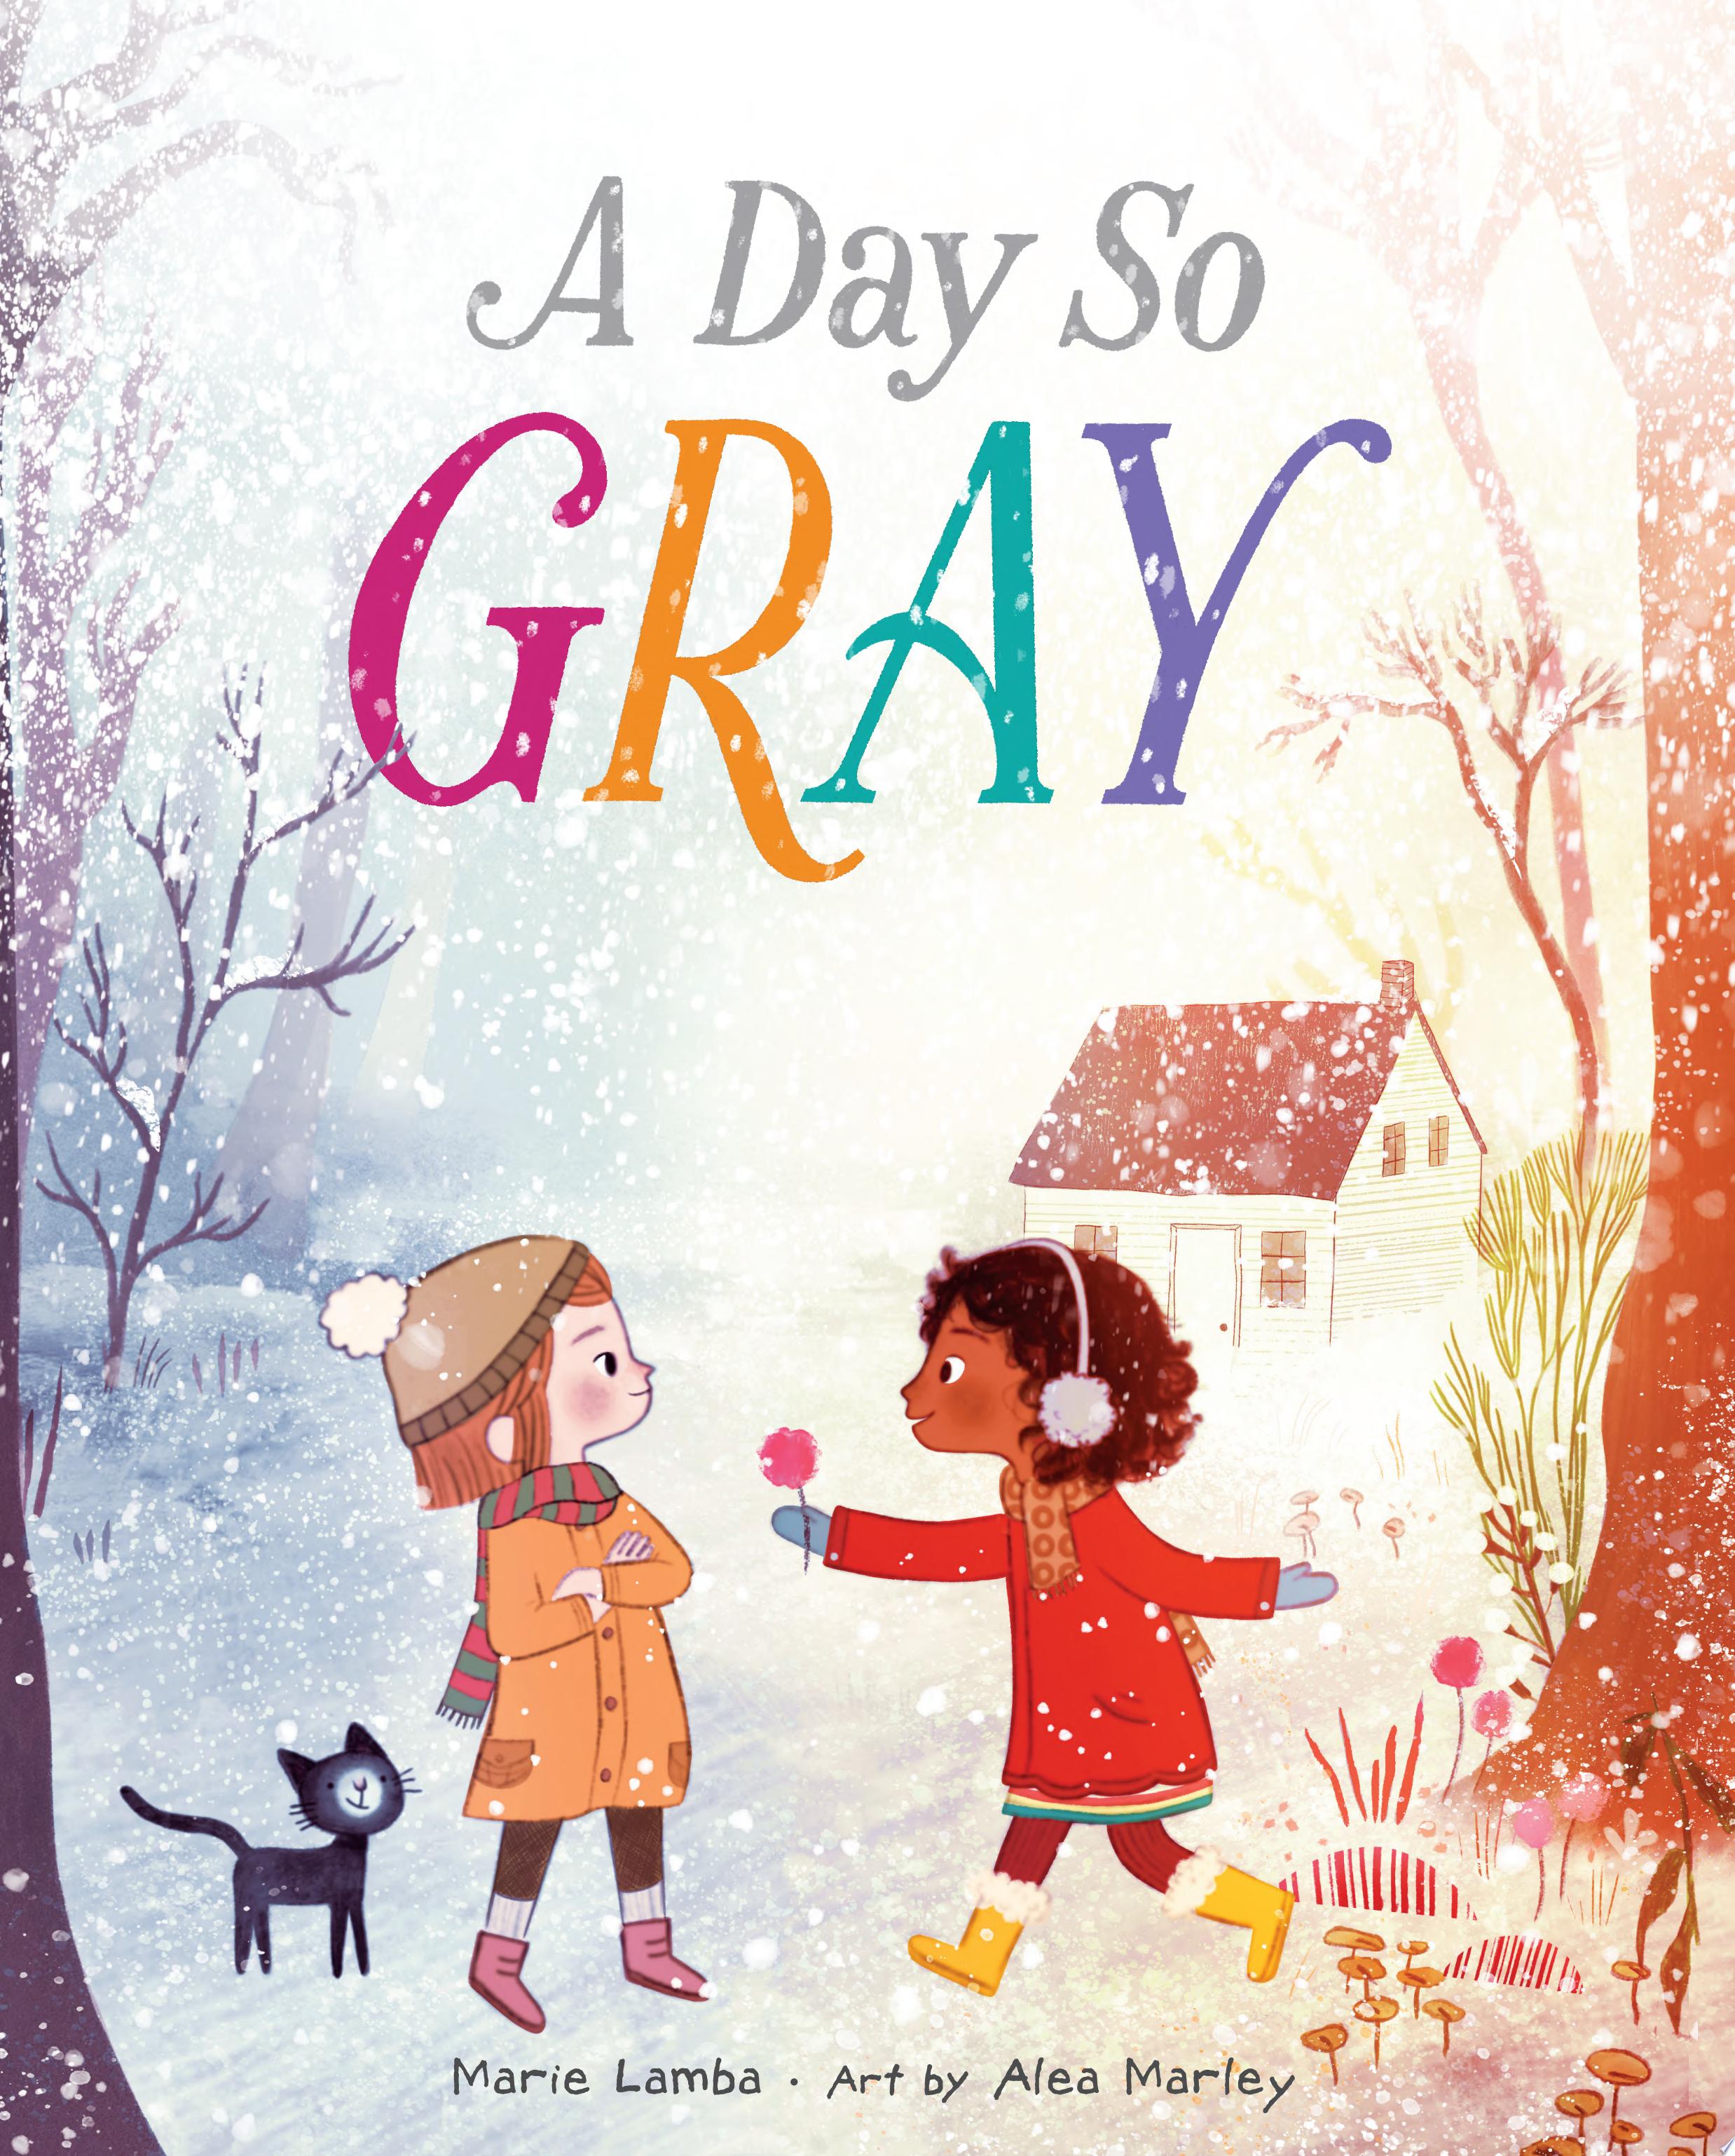 Image for "A Day So Gray"